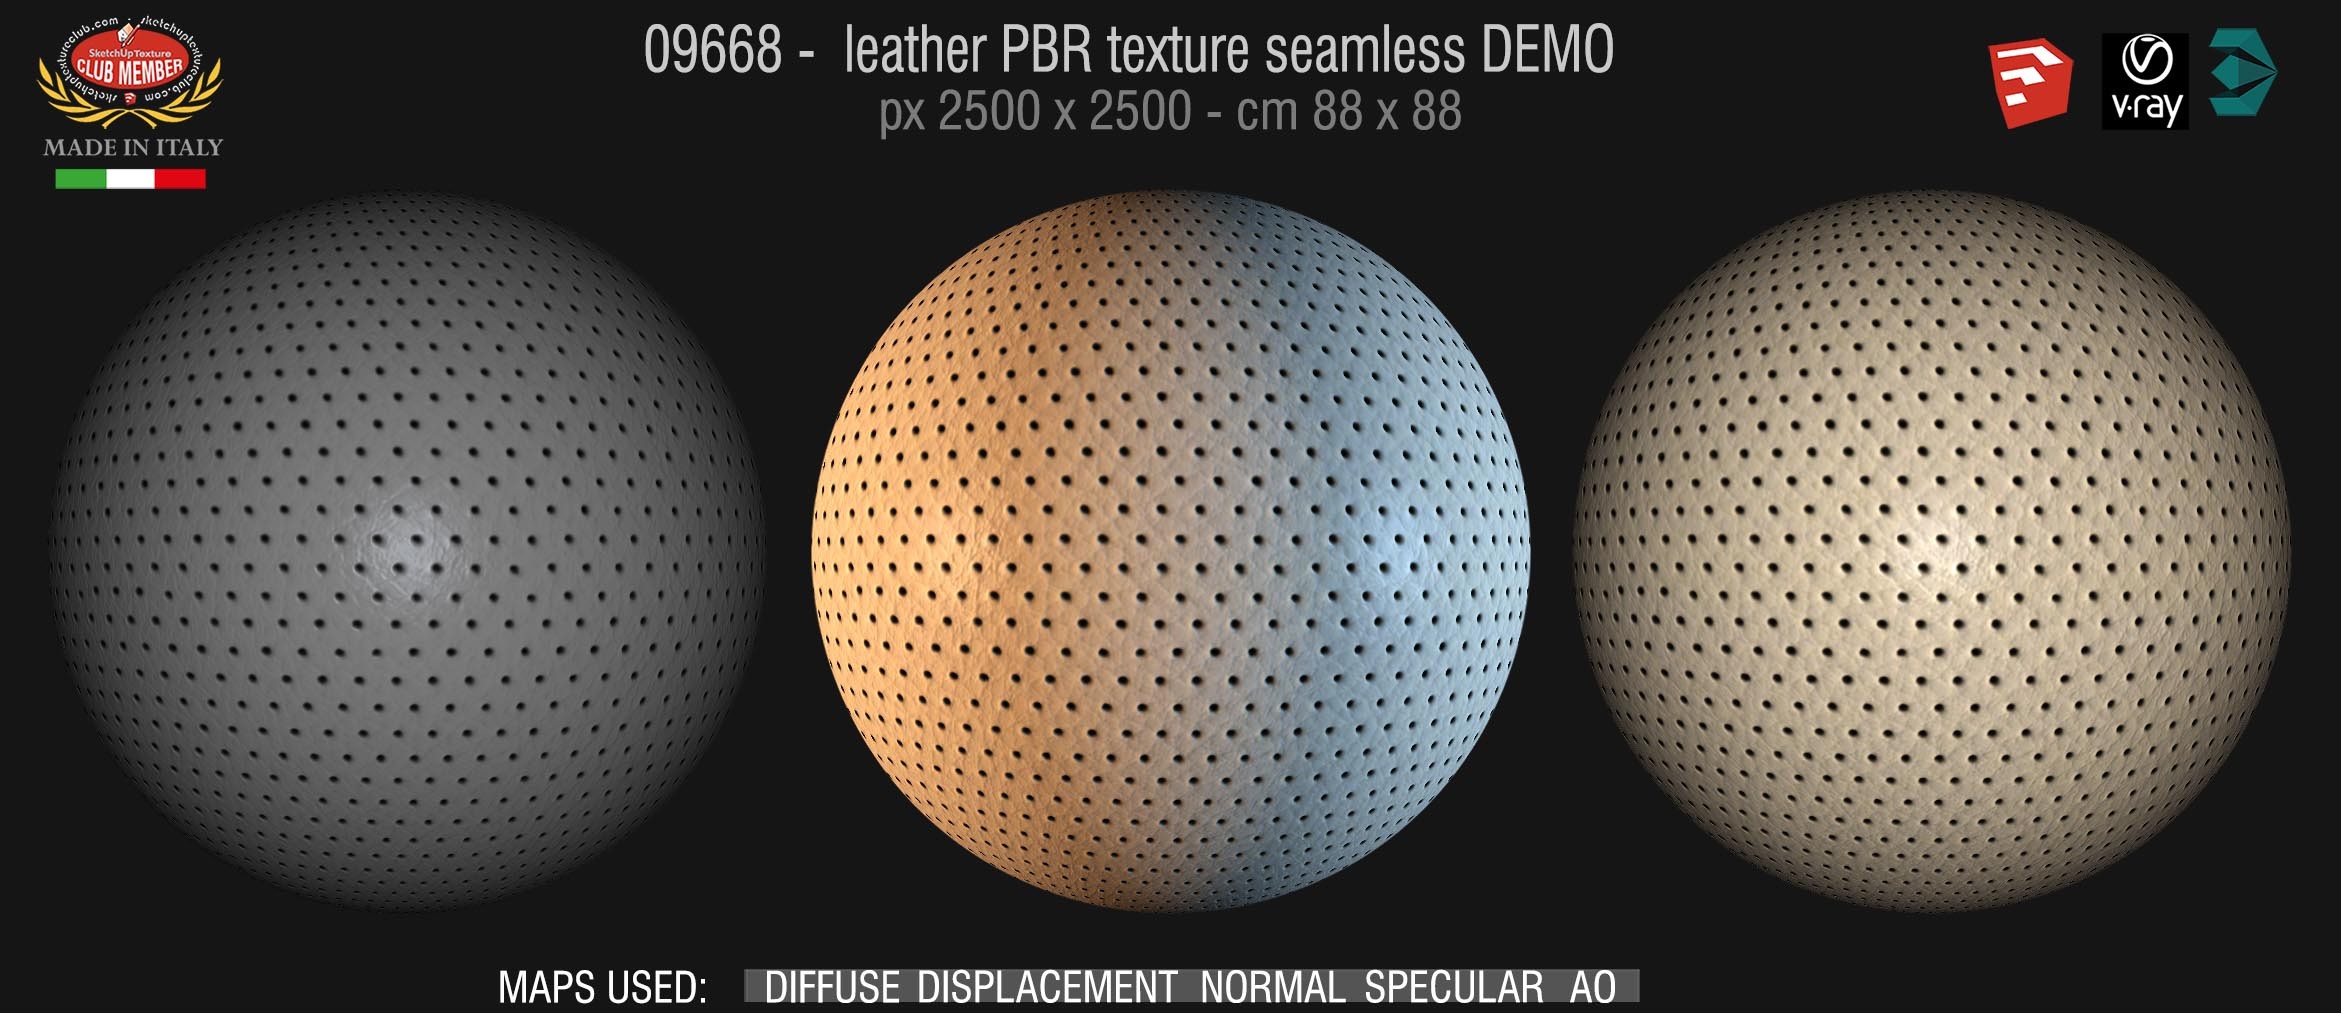 09668 leather PBR texture seamless DEMO